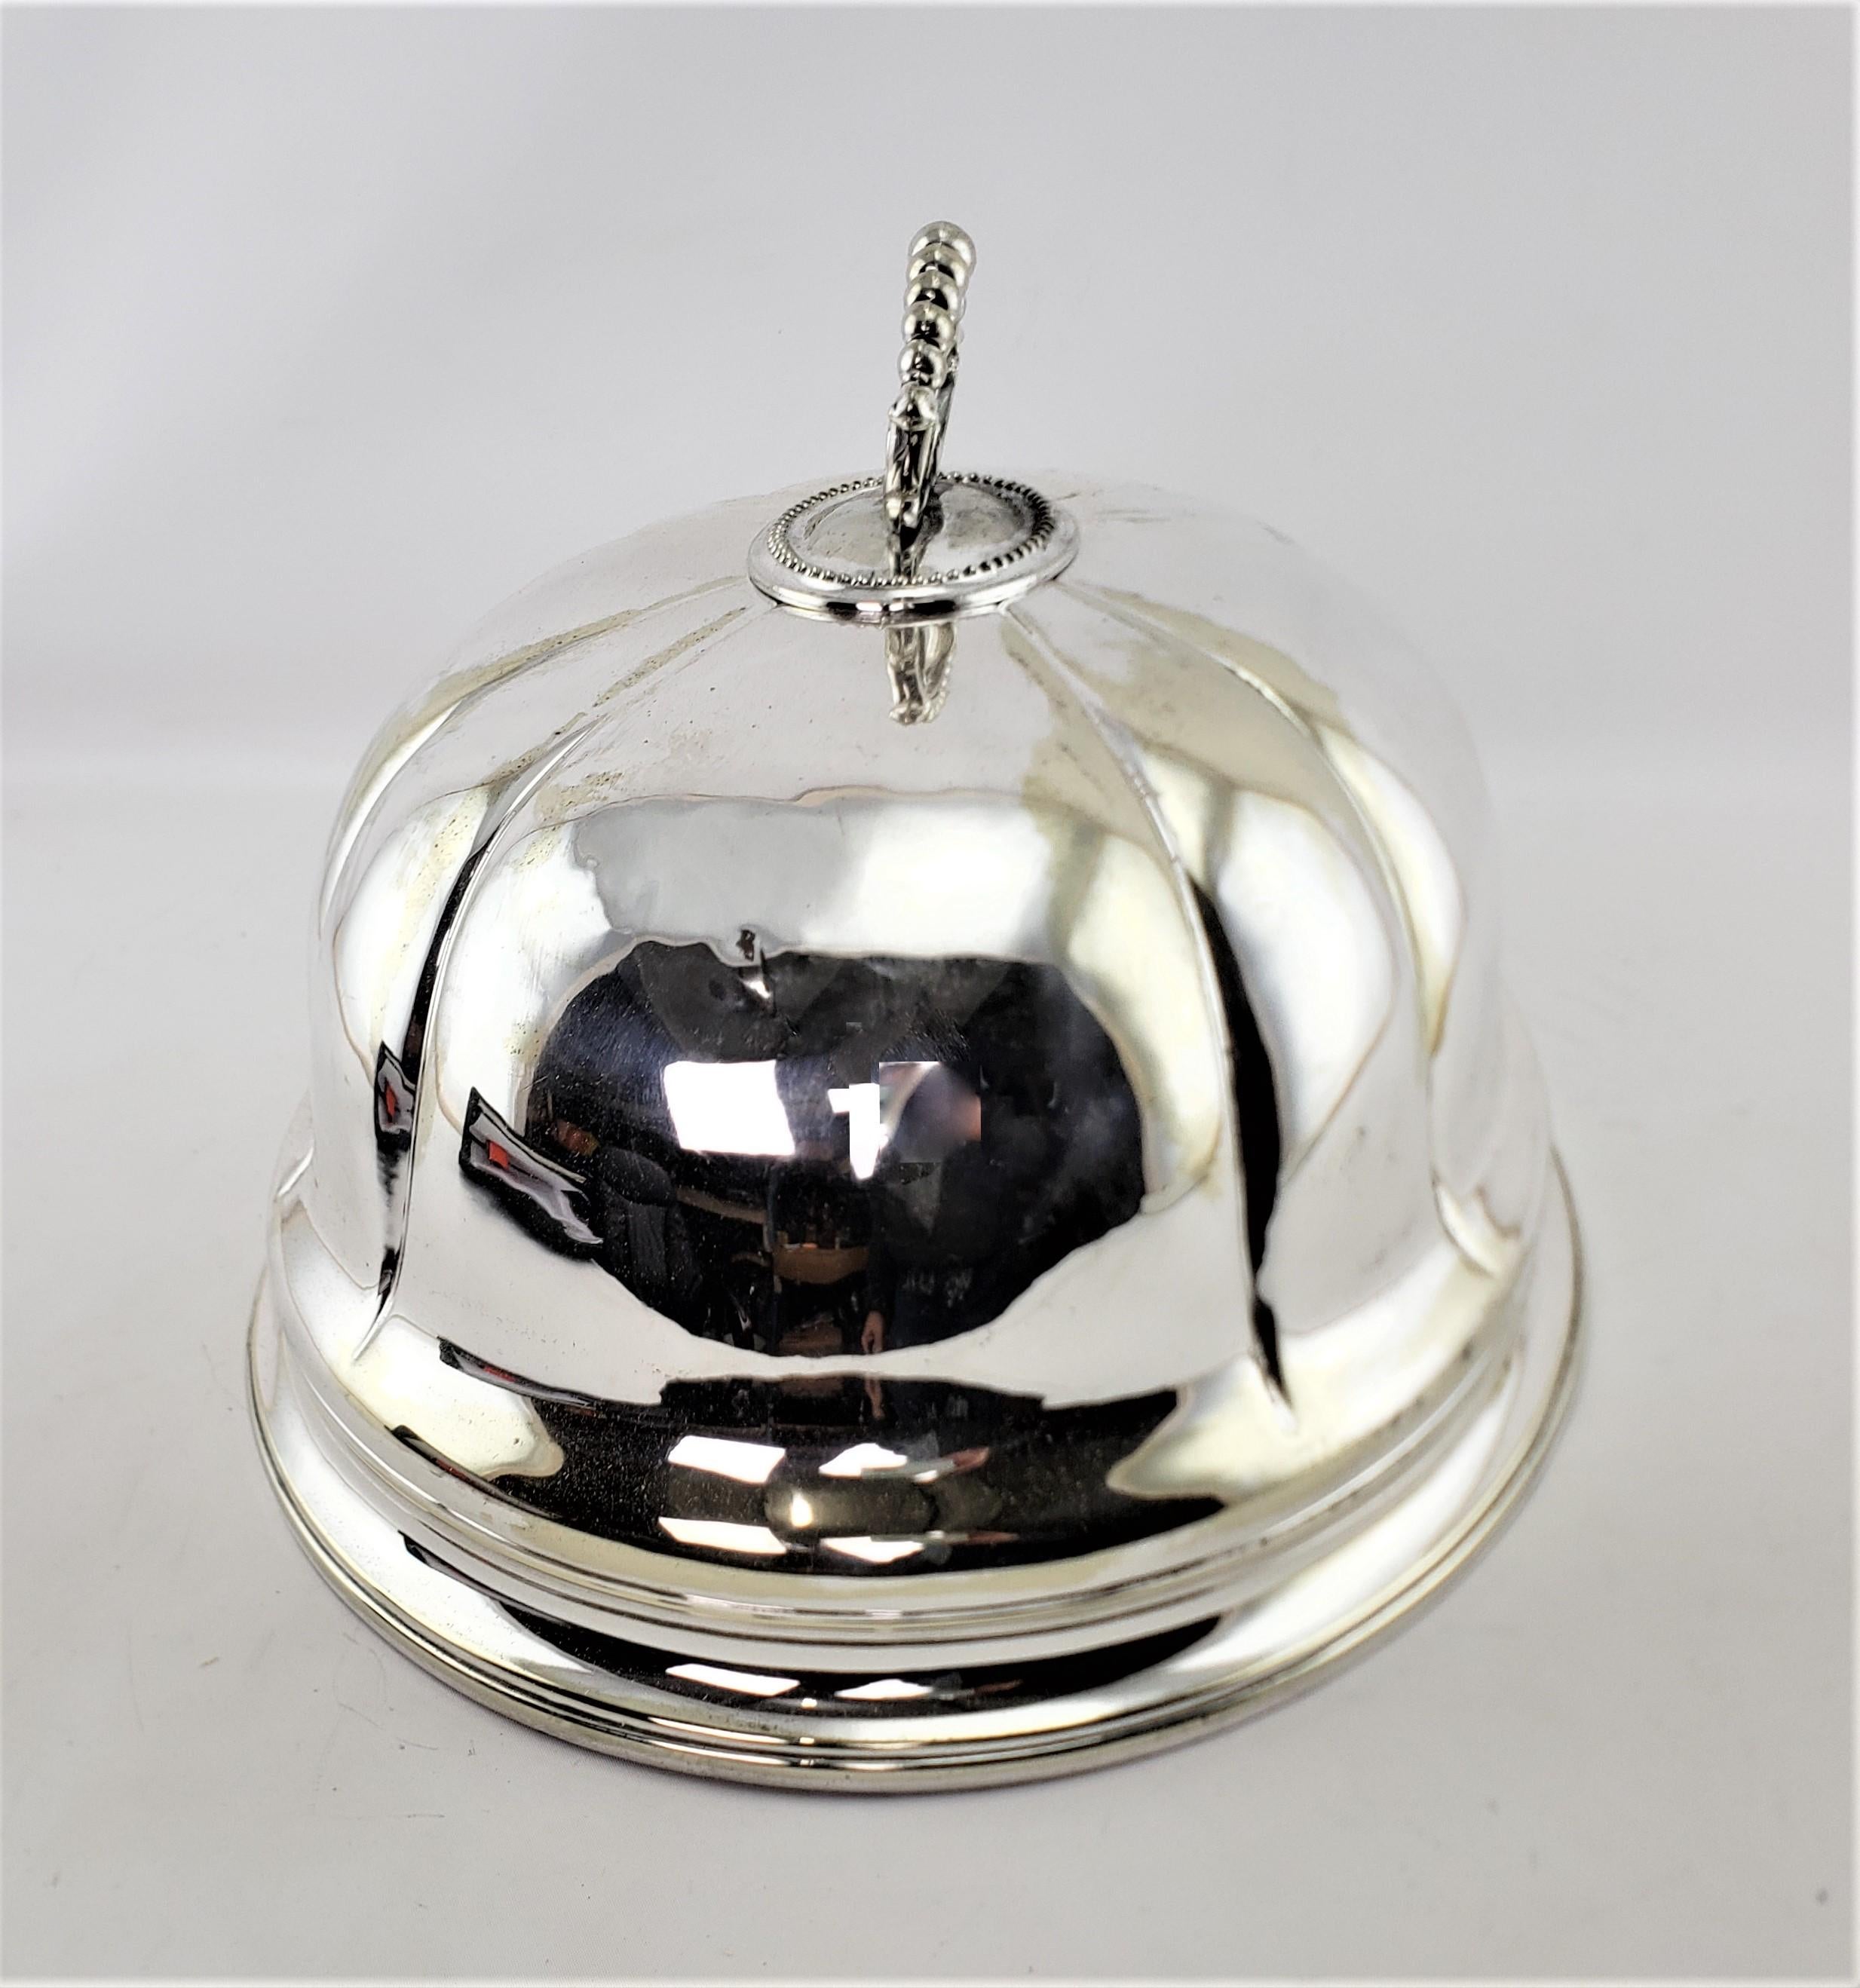 silver food dome